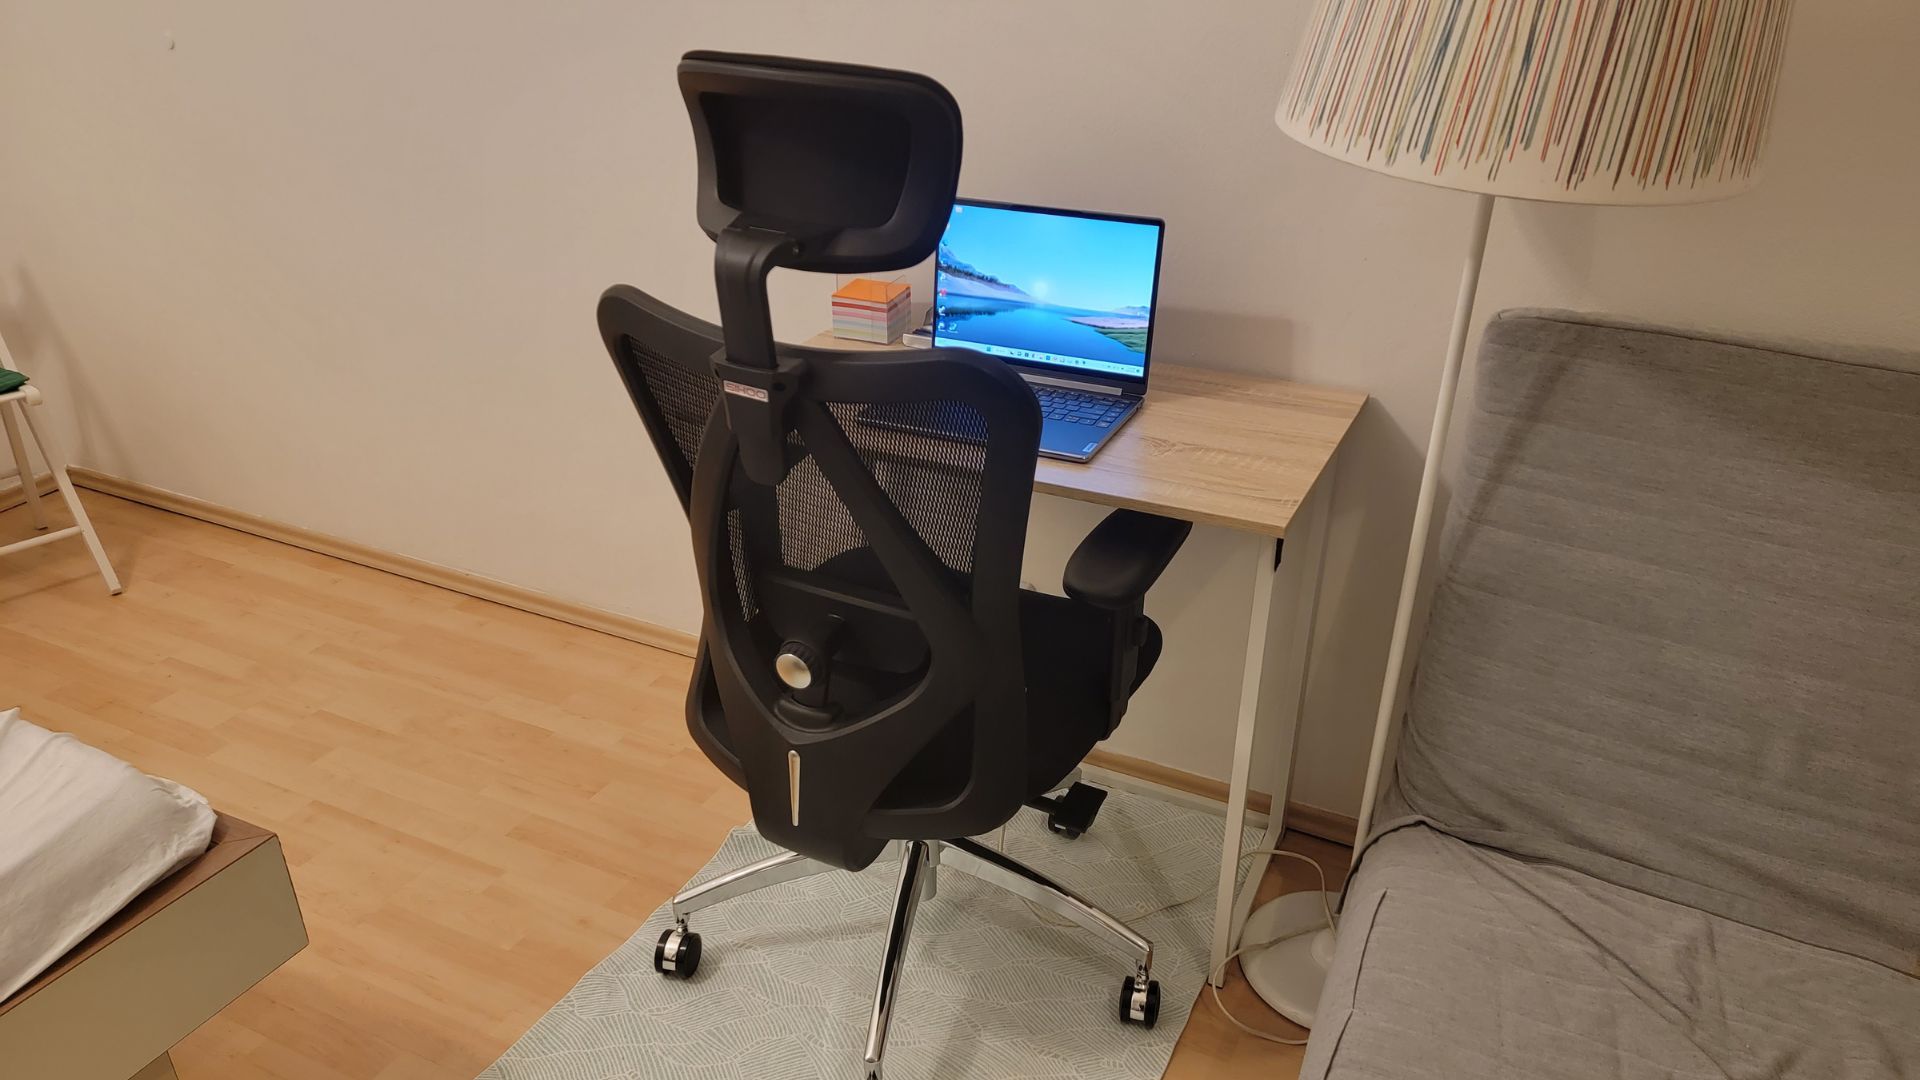 Bought the Sihoo M18 chair from . Didn't like the seat depth so  started the return process. But due to some difficulties disassembling and  fitting it back into the original box (couldn't remove the gas cylinder  without tools I don't own),  refunded